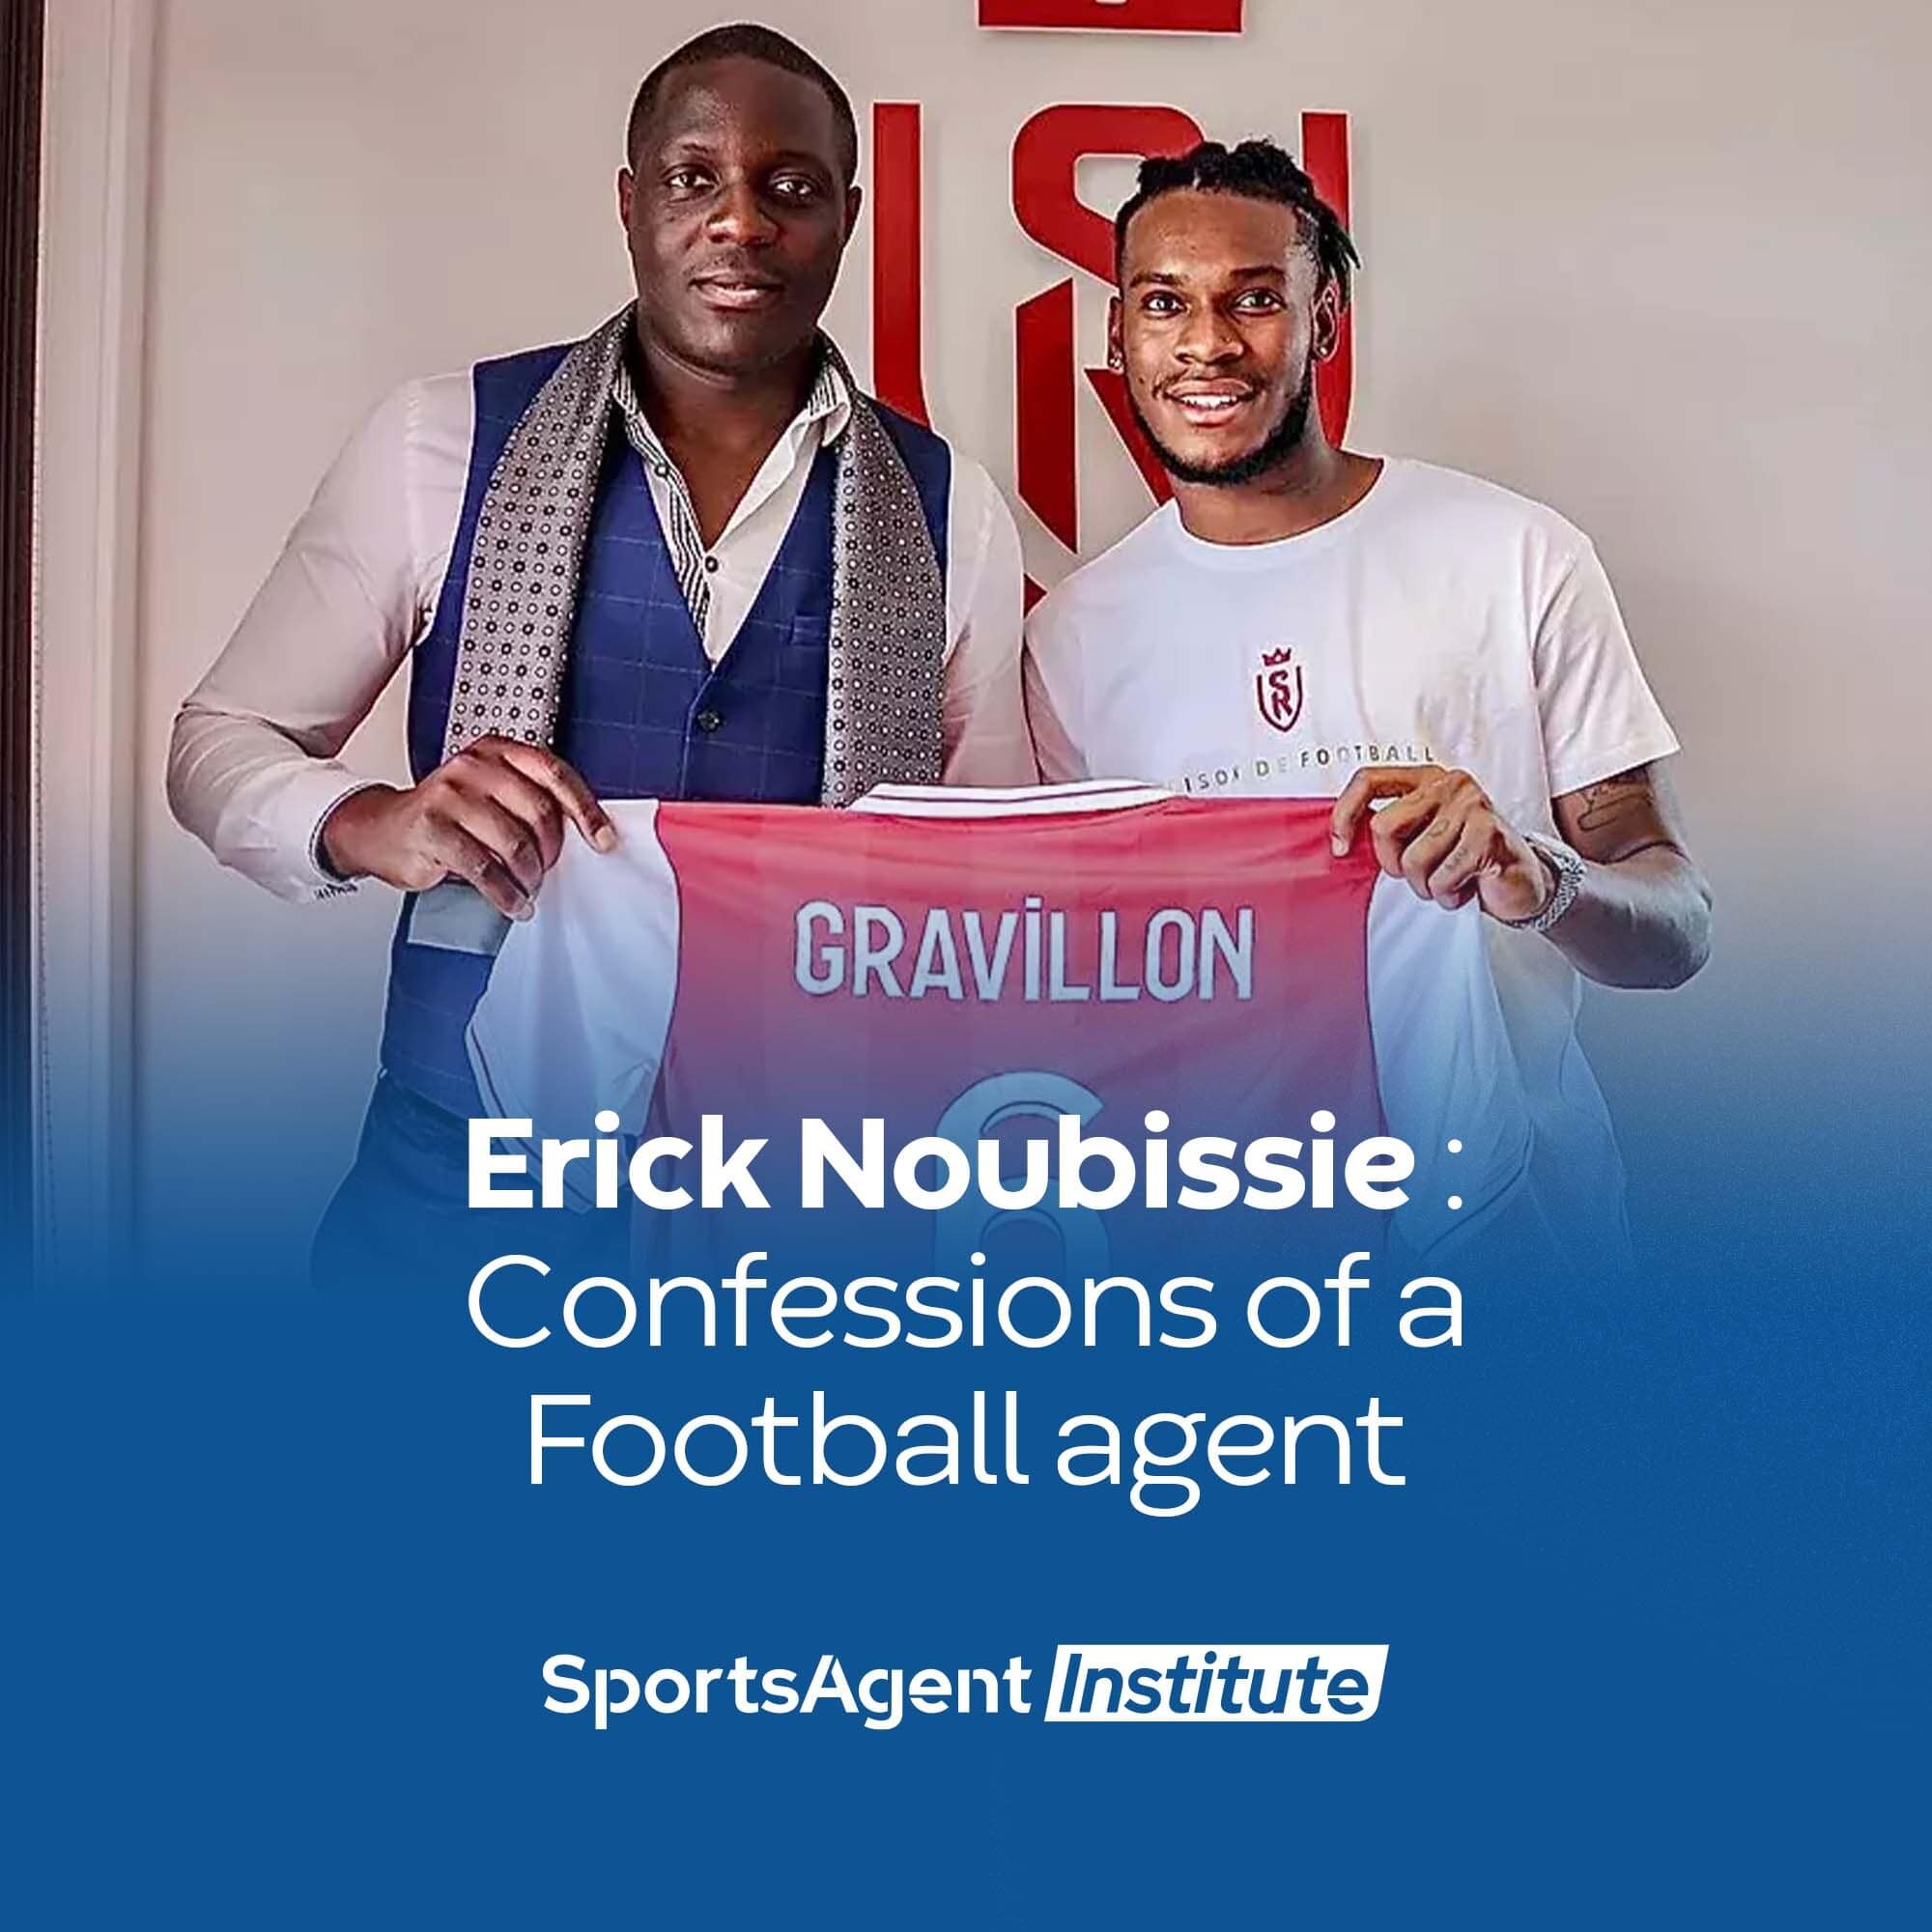 erick-noubissies-confessions-on-the-role-of-football-agents